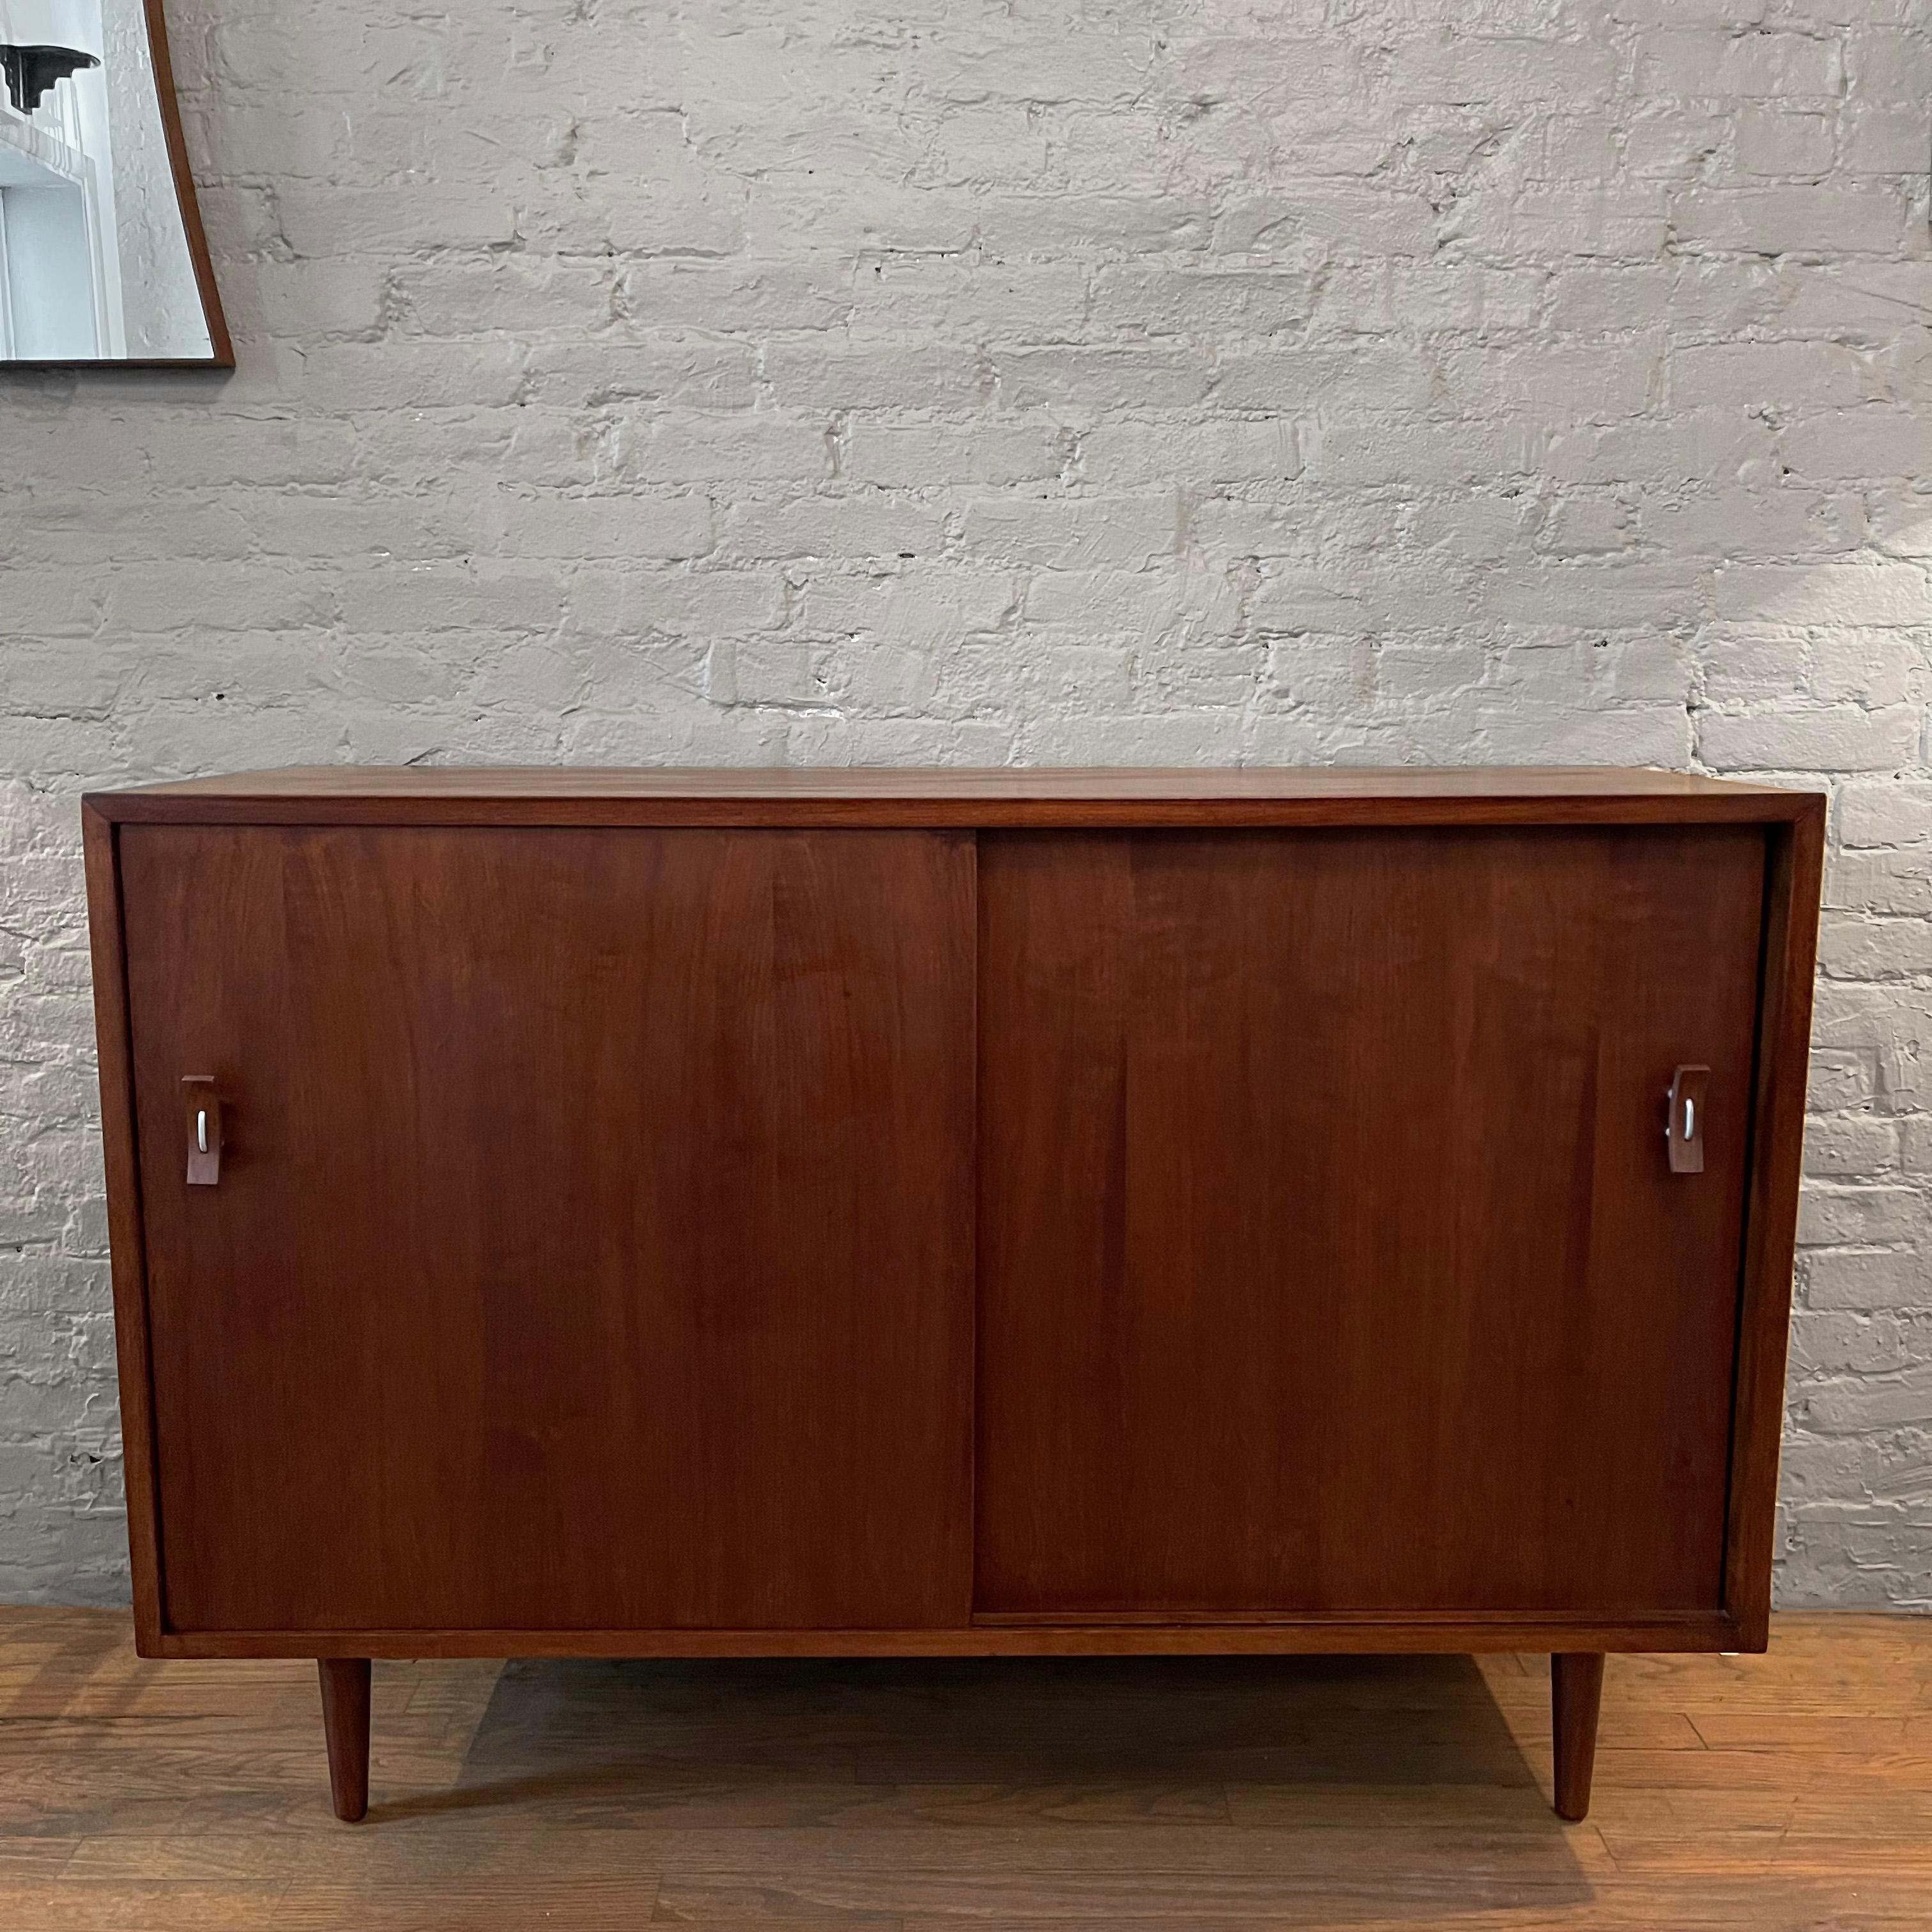 Neatly sized, minimal, mid century modern, walnut credenza by Stanley Young for Glenn Of California features distinctive bentwood and aluminum pulls. Interior storage includes 3 concealed drawers and shelf.